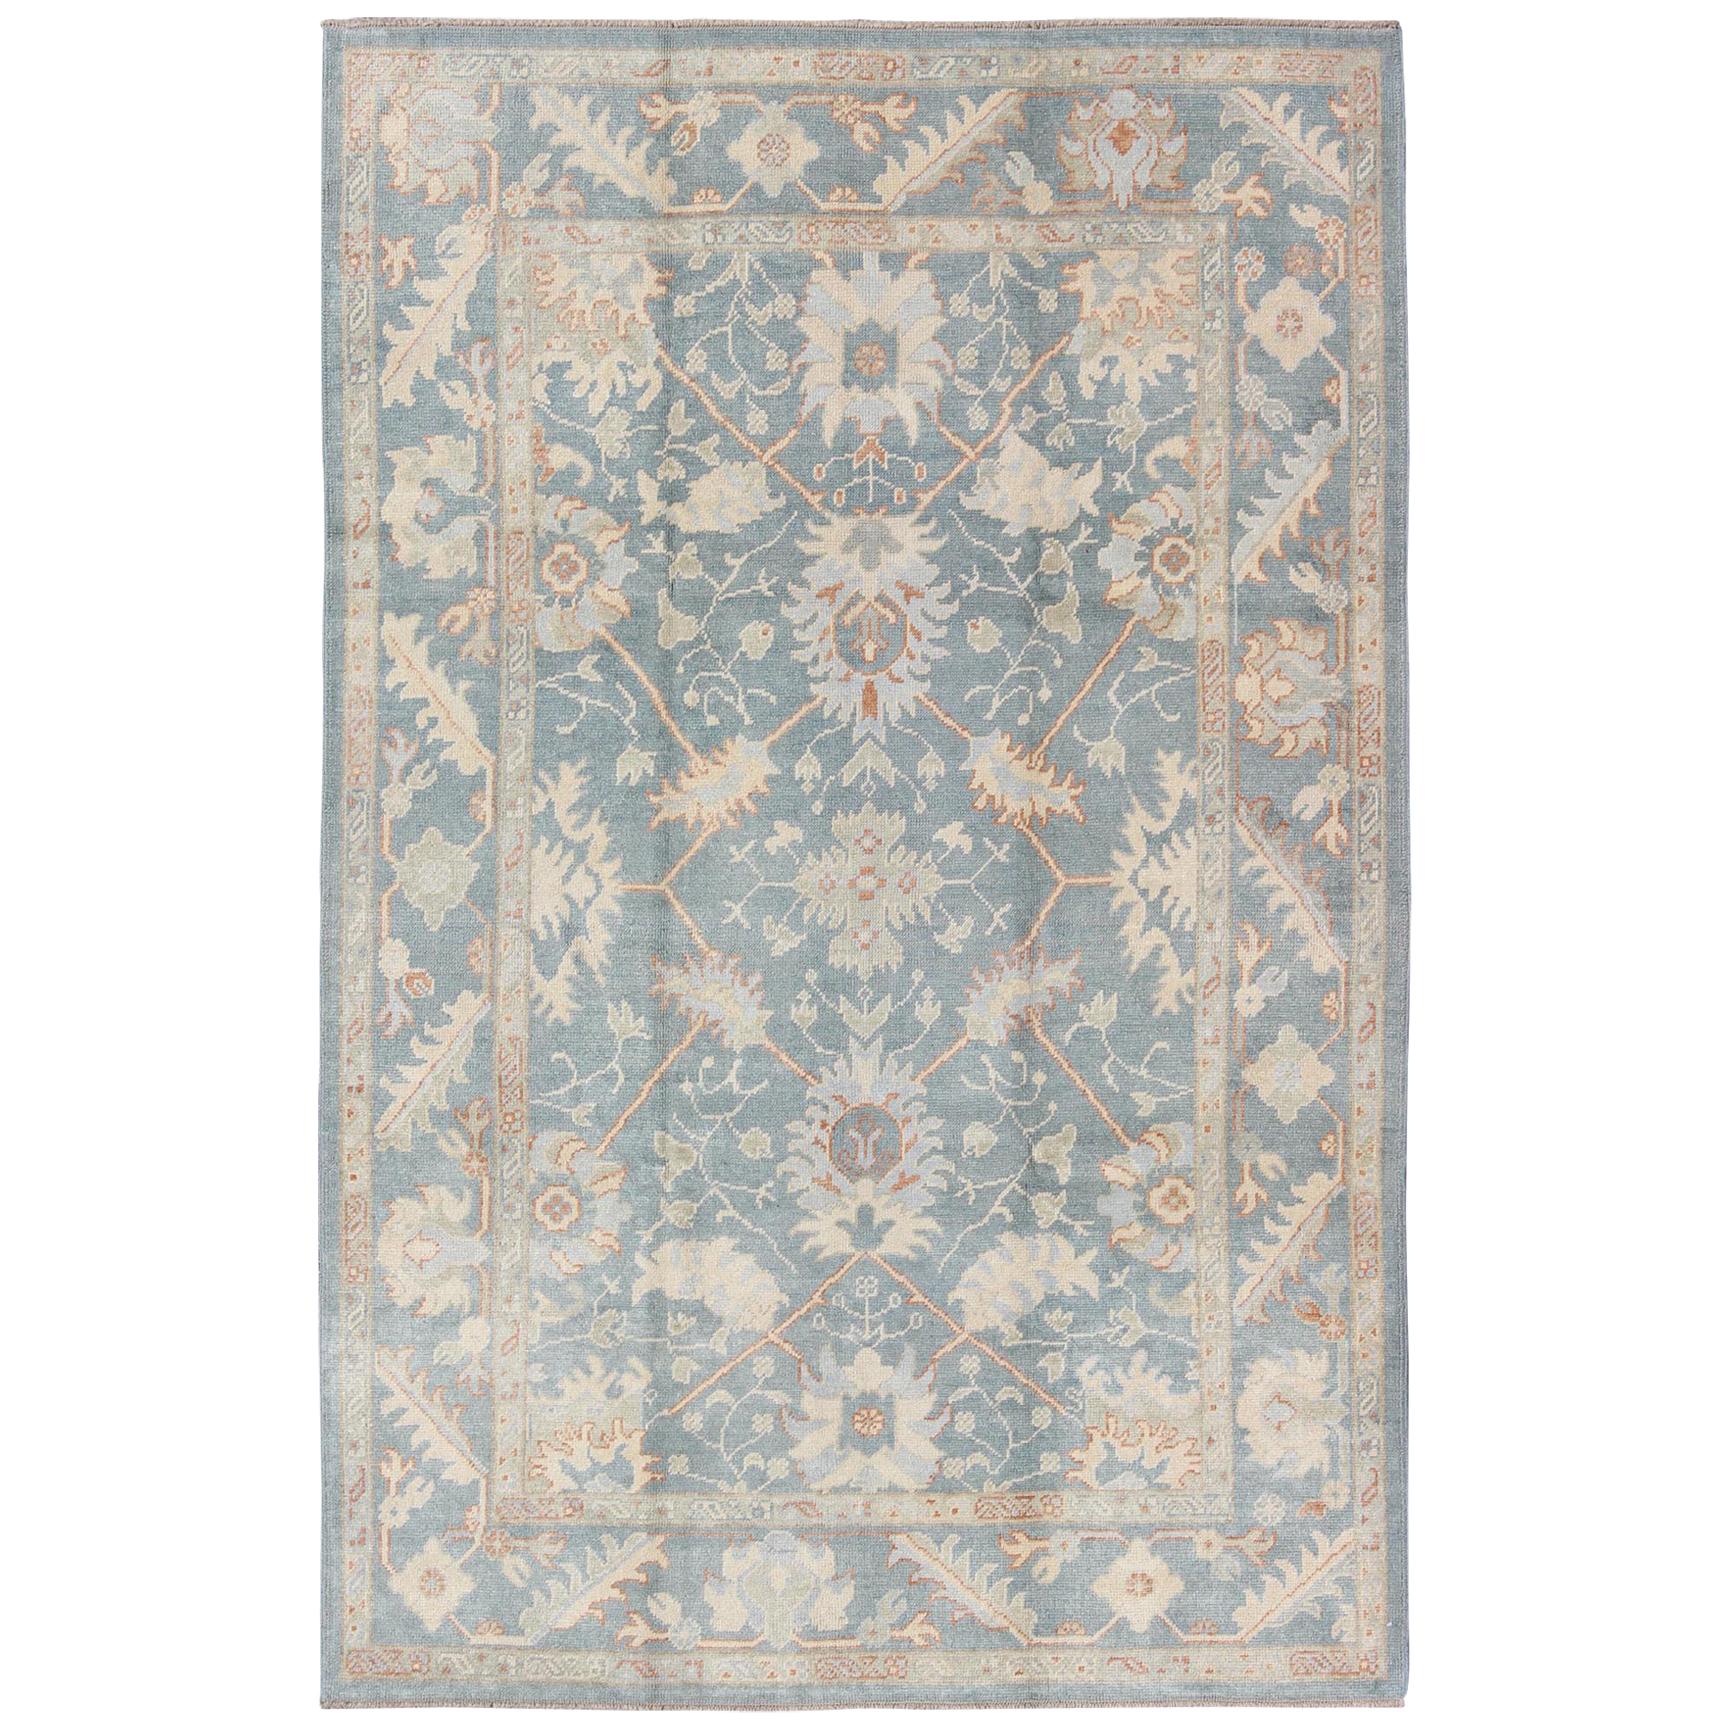 Turkish Oushak Rug with Floral Design in Light Steel-Blue and Coral Accent